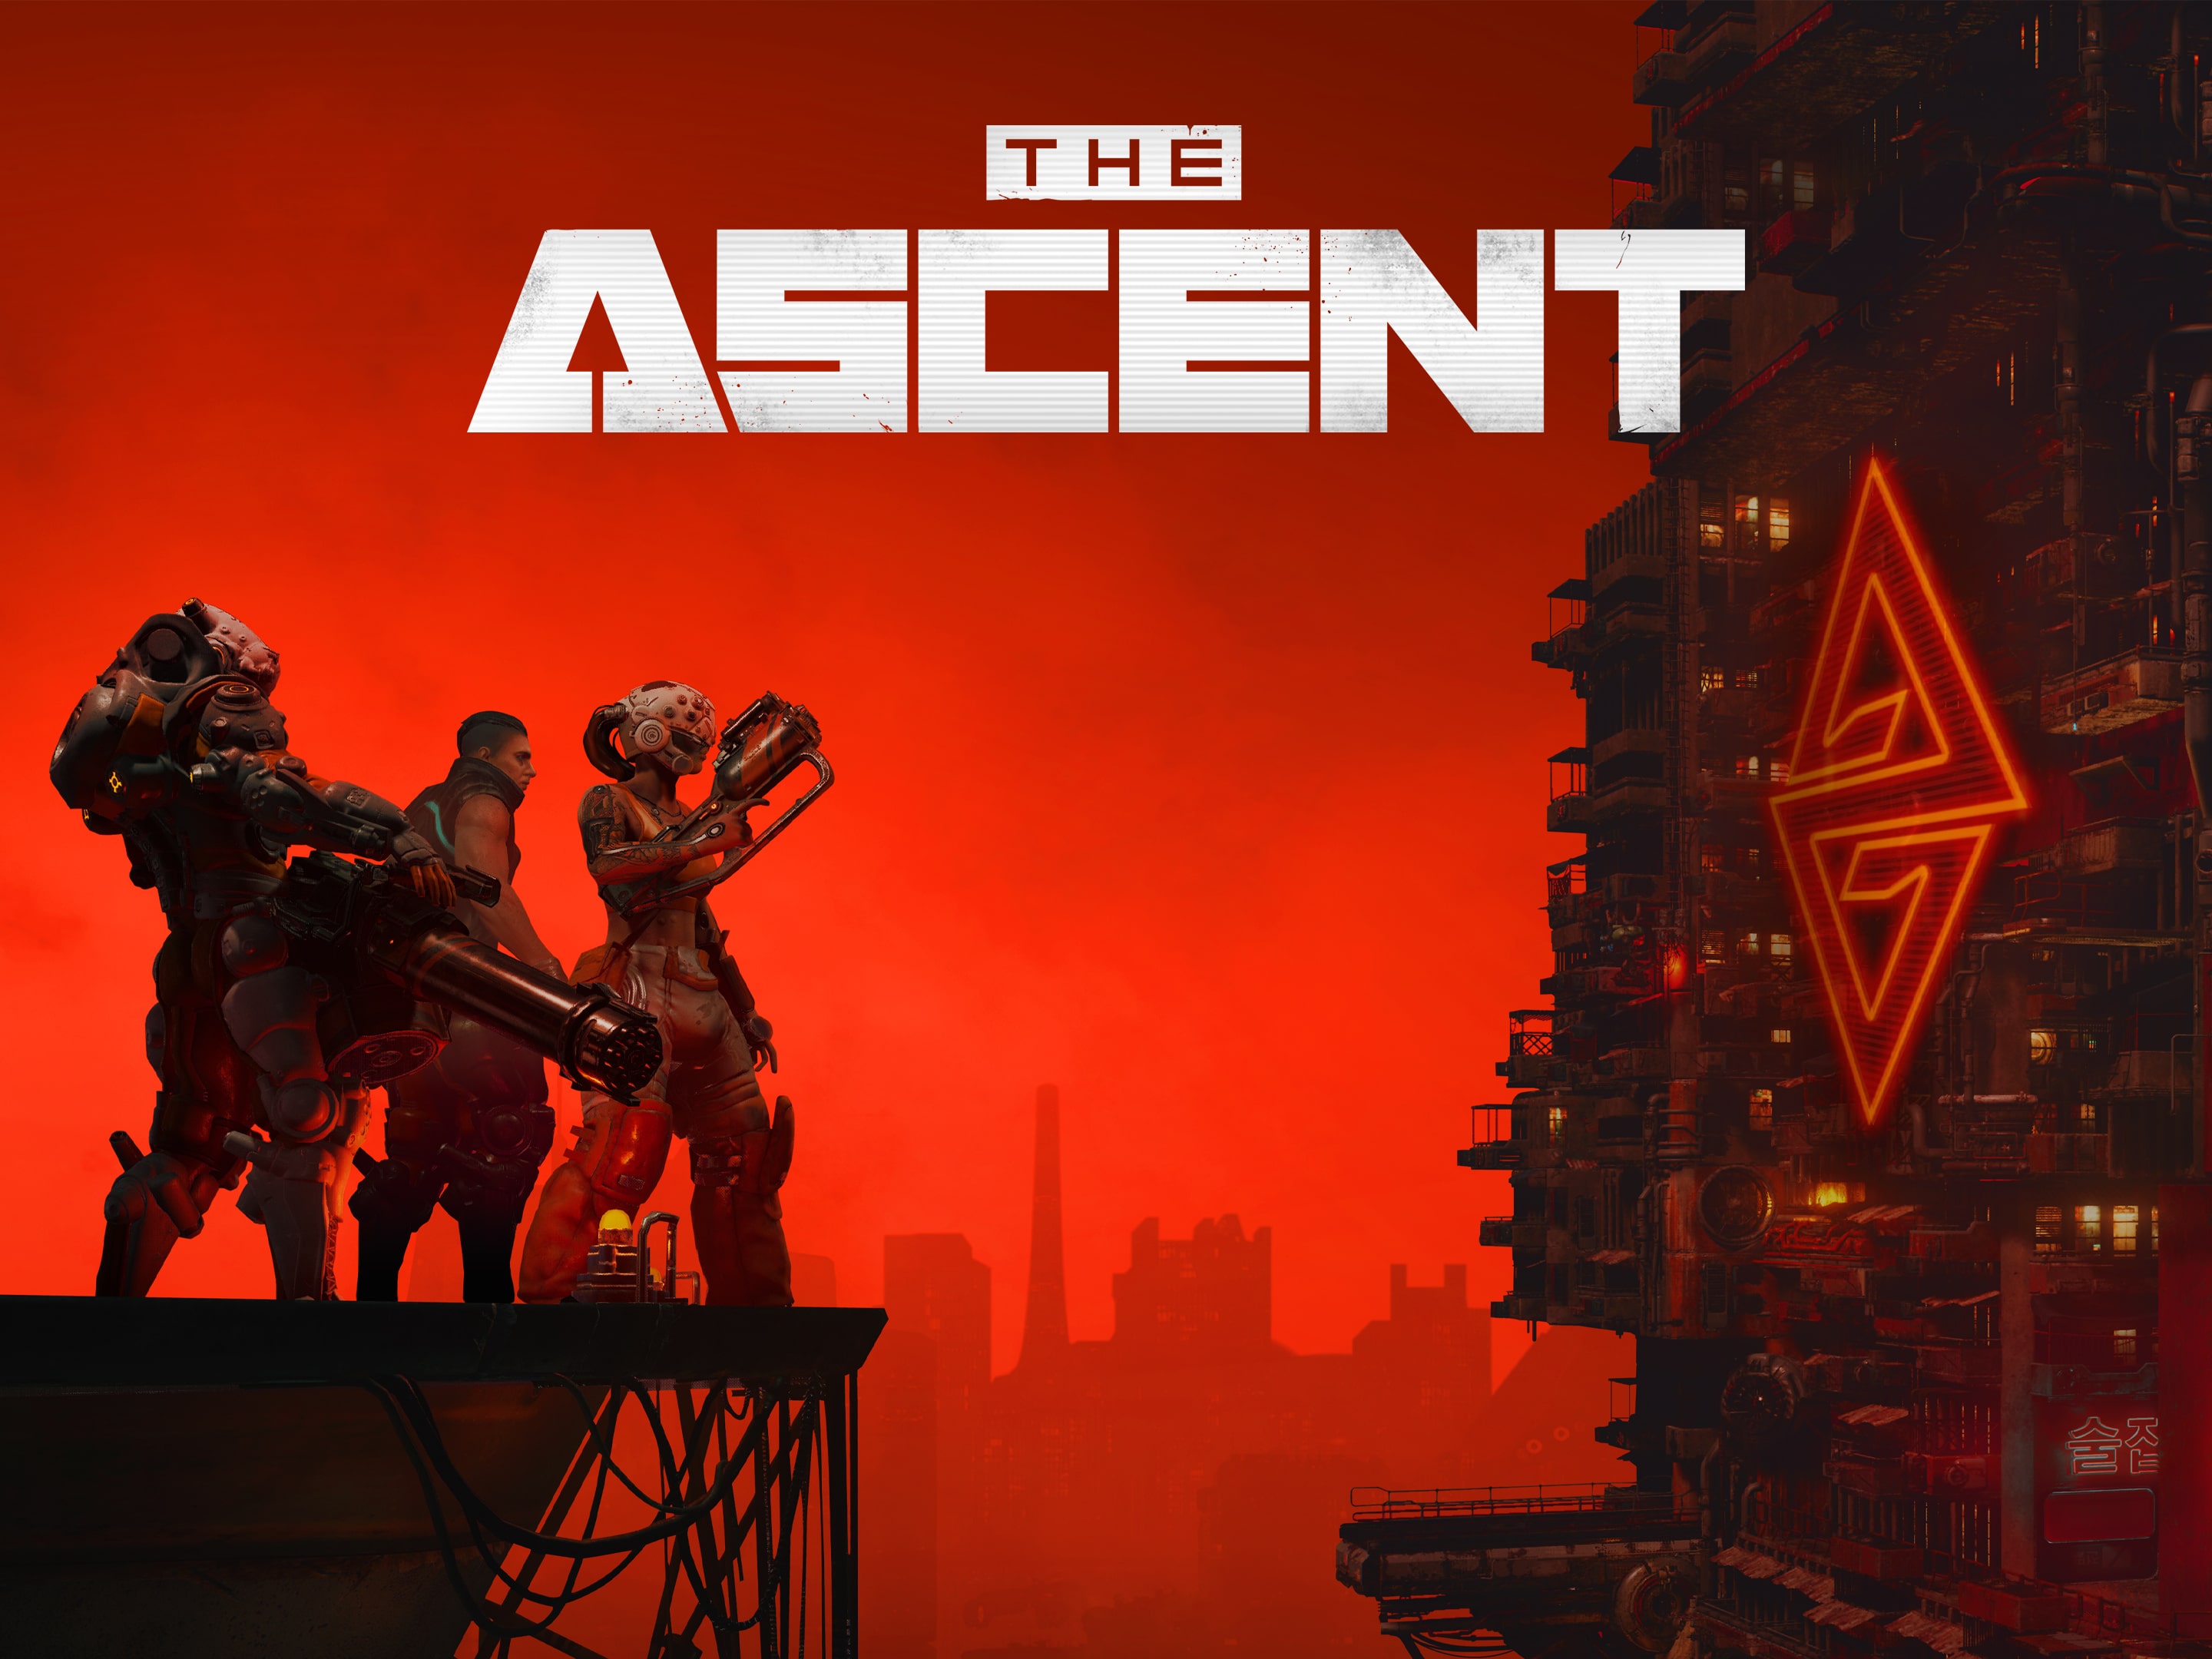 The Ascent PS4 & PS5